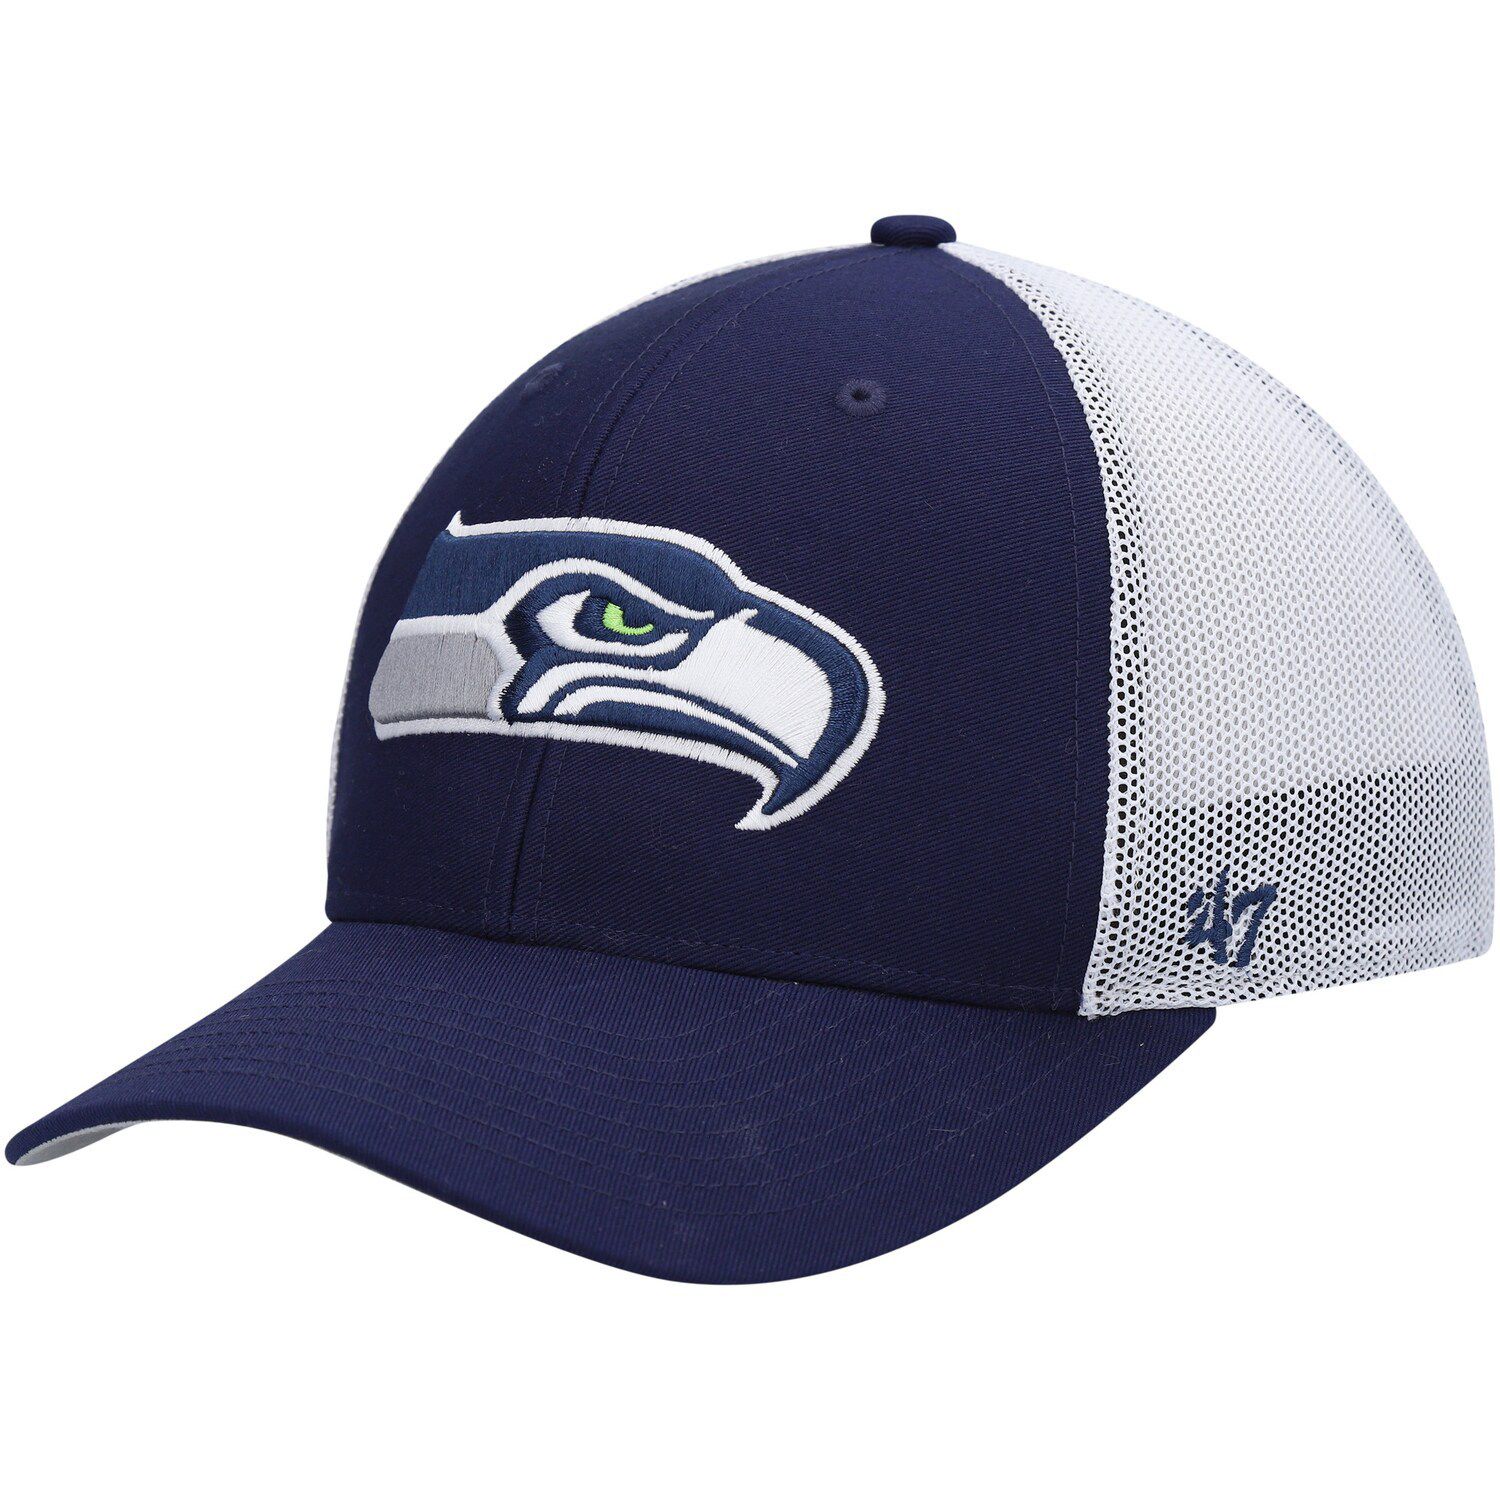 Men's New Era College Navy Seattle Seahawks A-Frame 9FIFTY